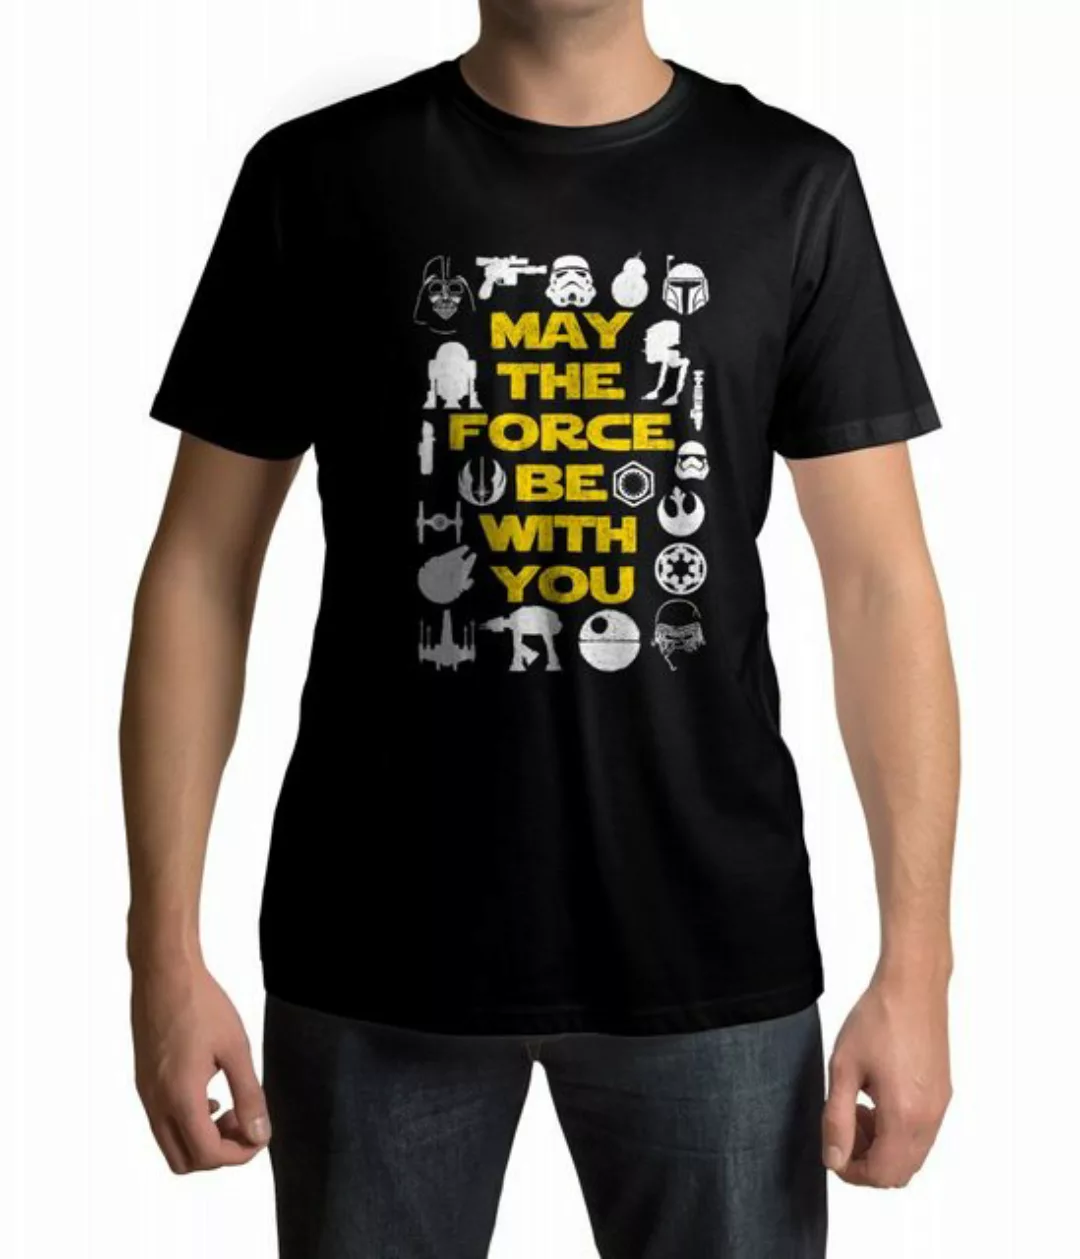 Lootchest T-Shirt May the Force be with you günstig online kaufen